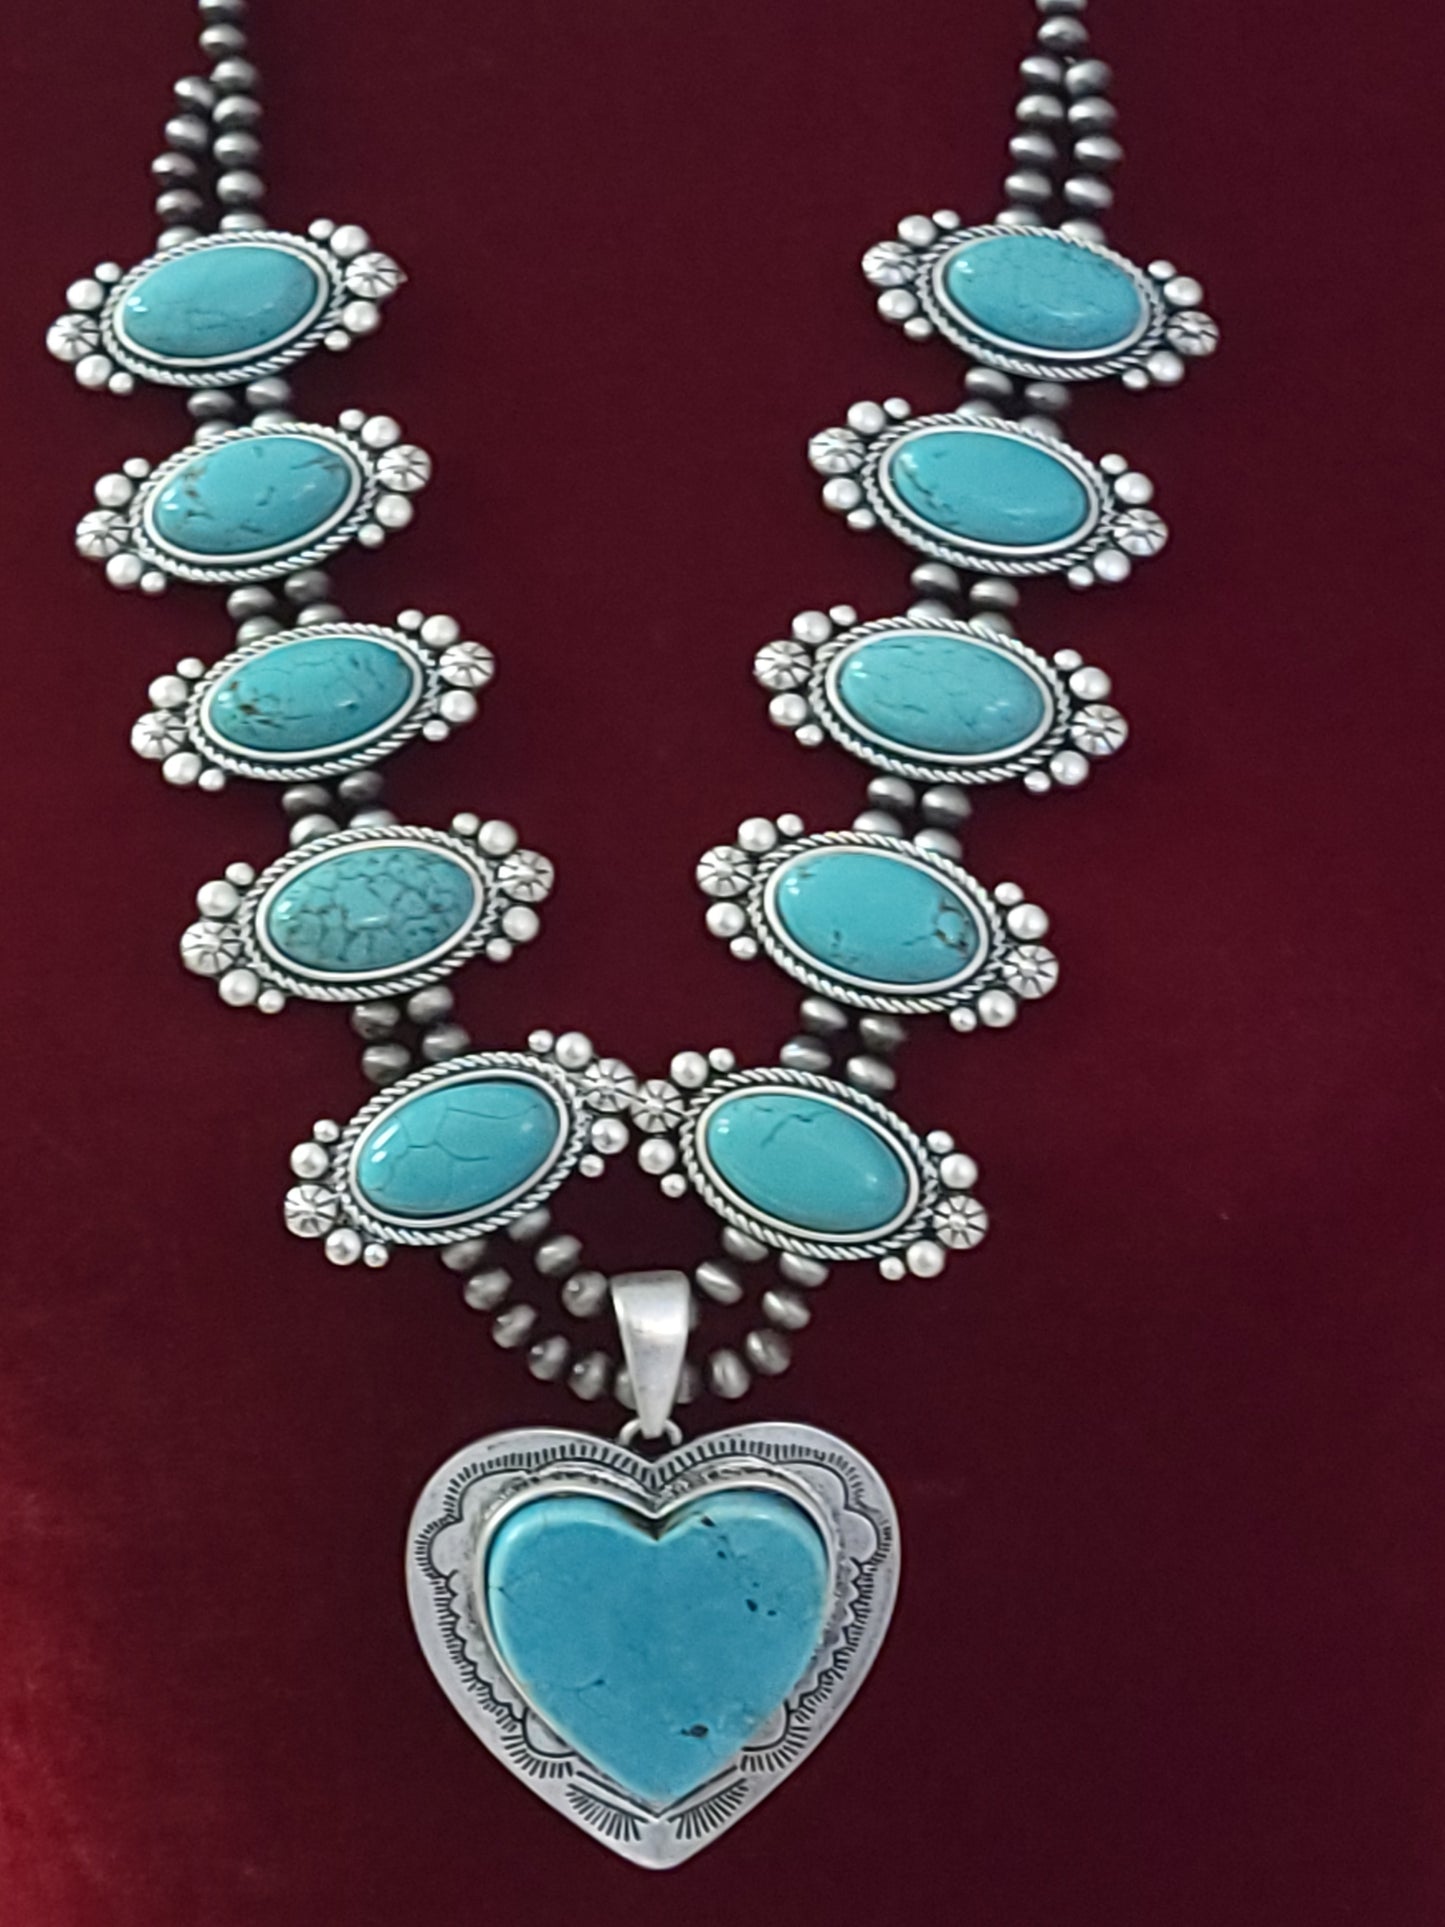 FULL SQUASH BLOSSOM HEART TURQUOISE NECKLACE. NATURAL STONE.  (530)